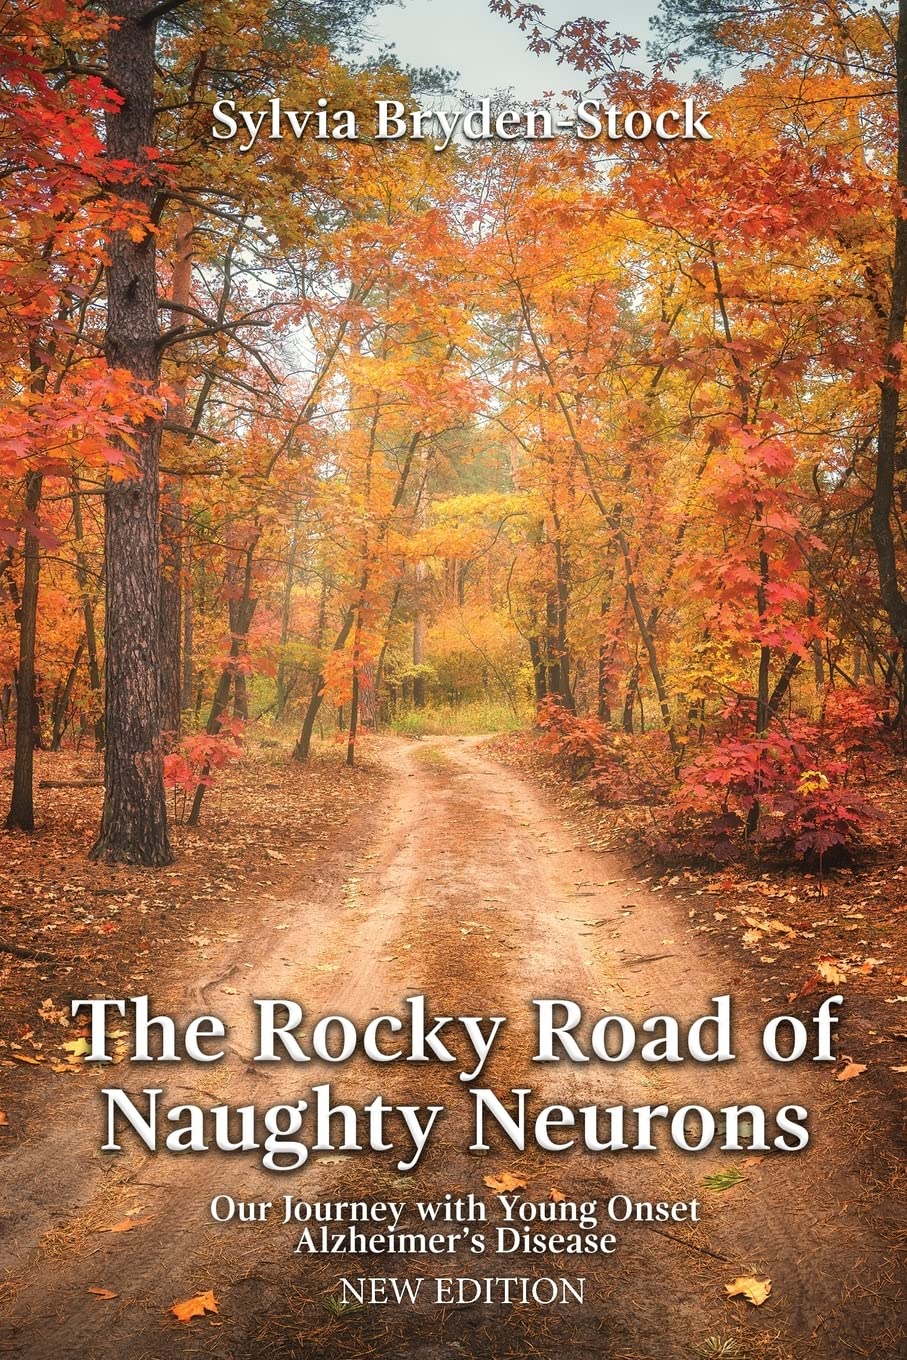 Author's Tranquility Press Presents "The Rocky Road of Naughty Neurons" - A Journey Through the Early Stages of Young-Onset Alzheimer's Disease